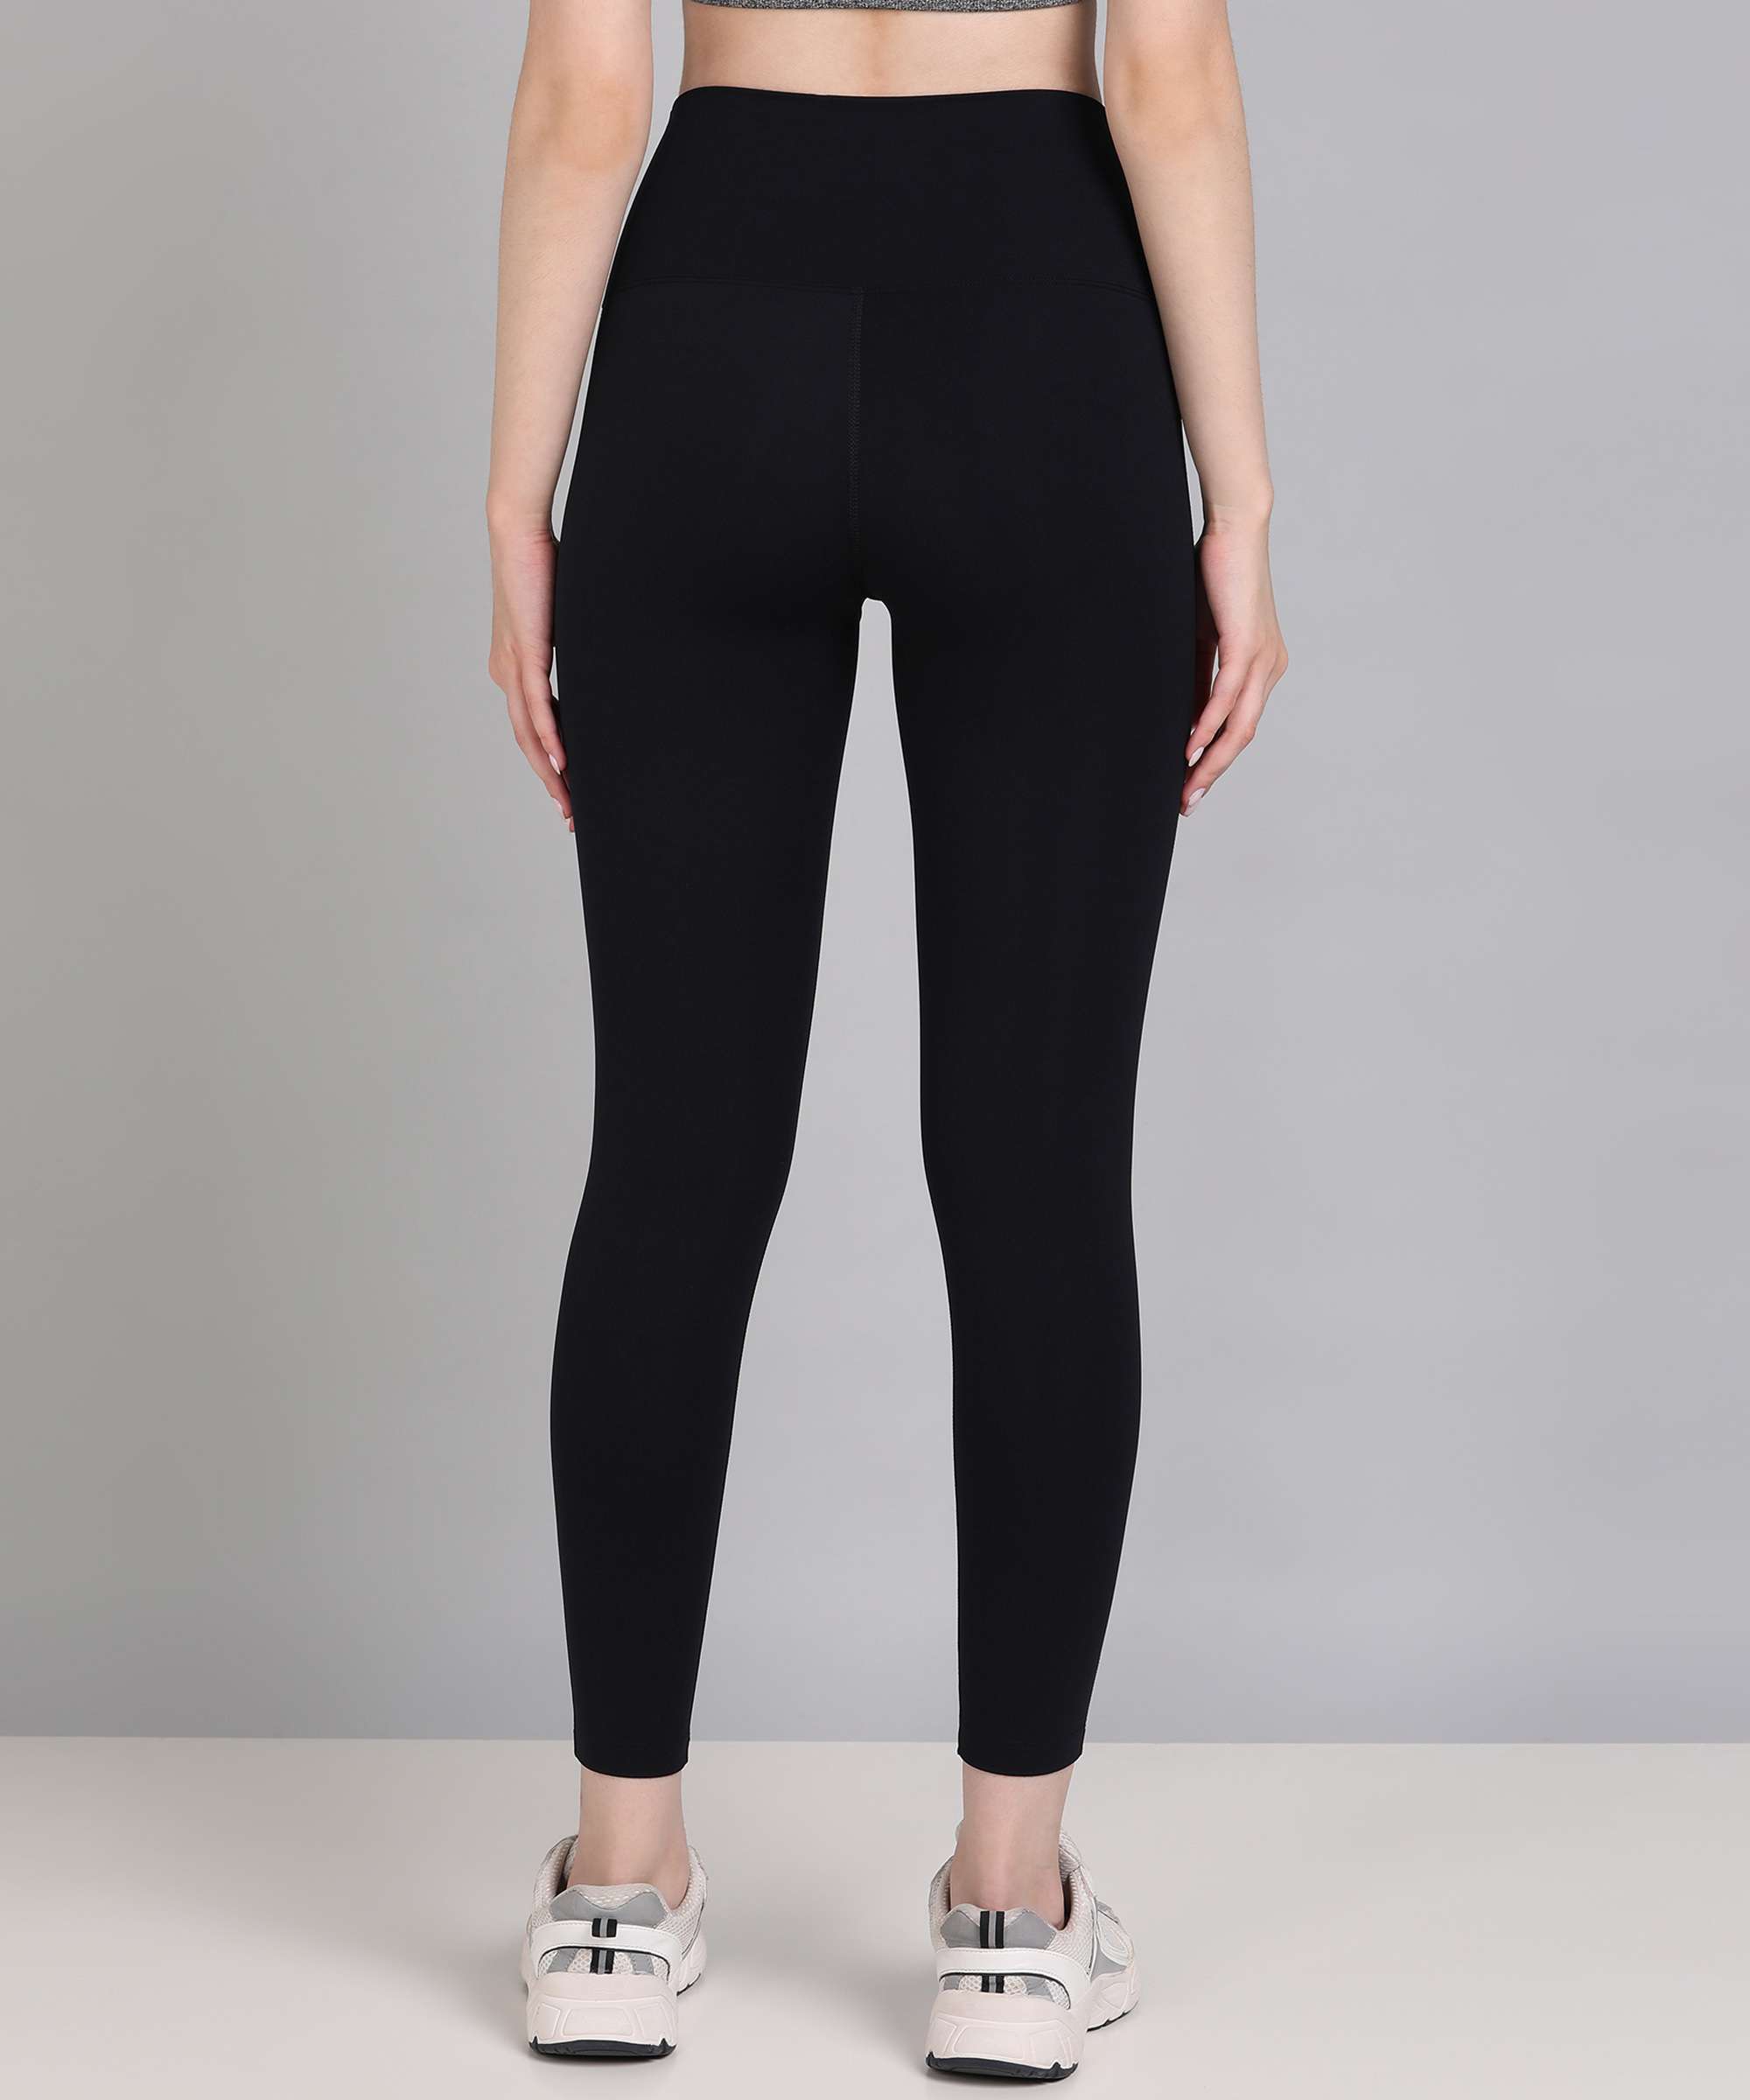 High Waist Running Tights - KOBO SPORTS Exclusively Designed For Workouts